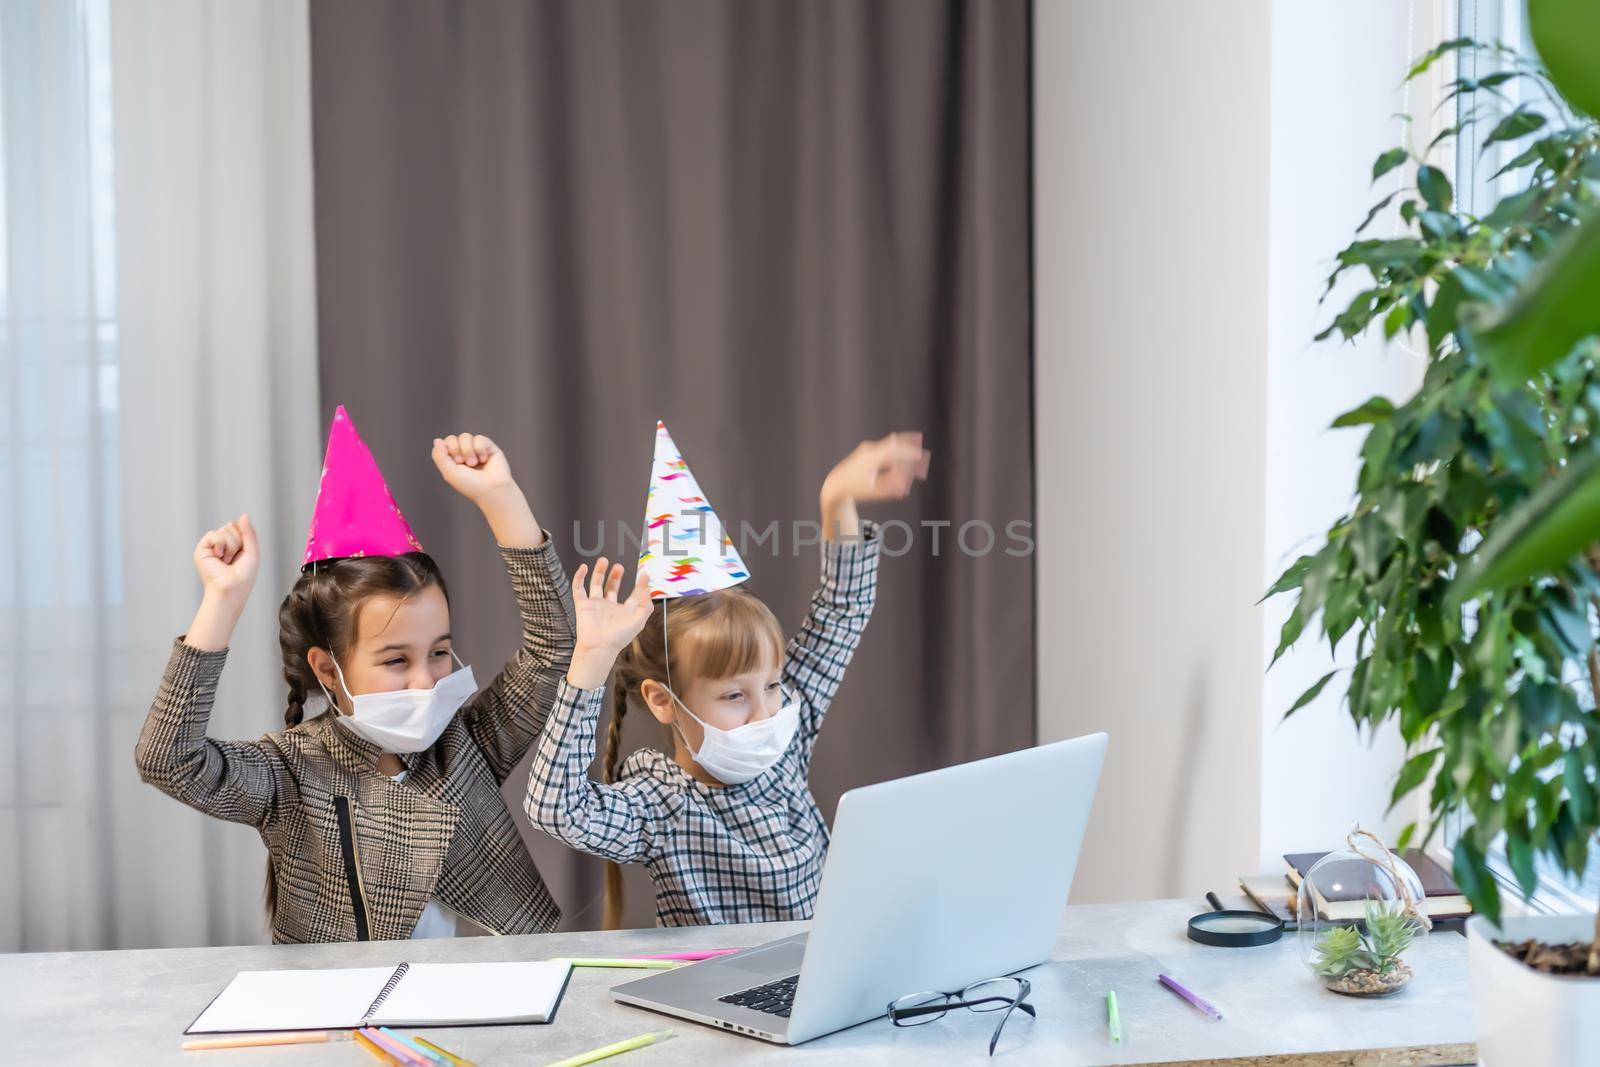 Happy family with two sibling celebrating birthday via internet in quarantine time, self-isolation and family values, online birthday party by Andelov13